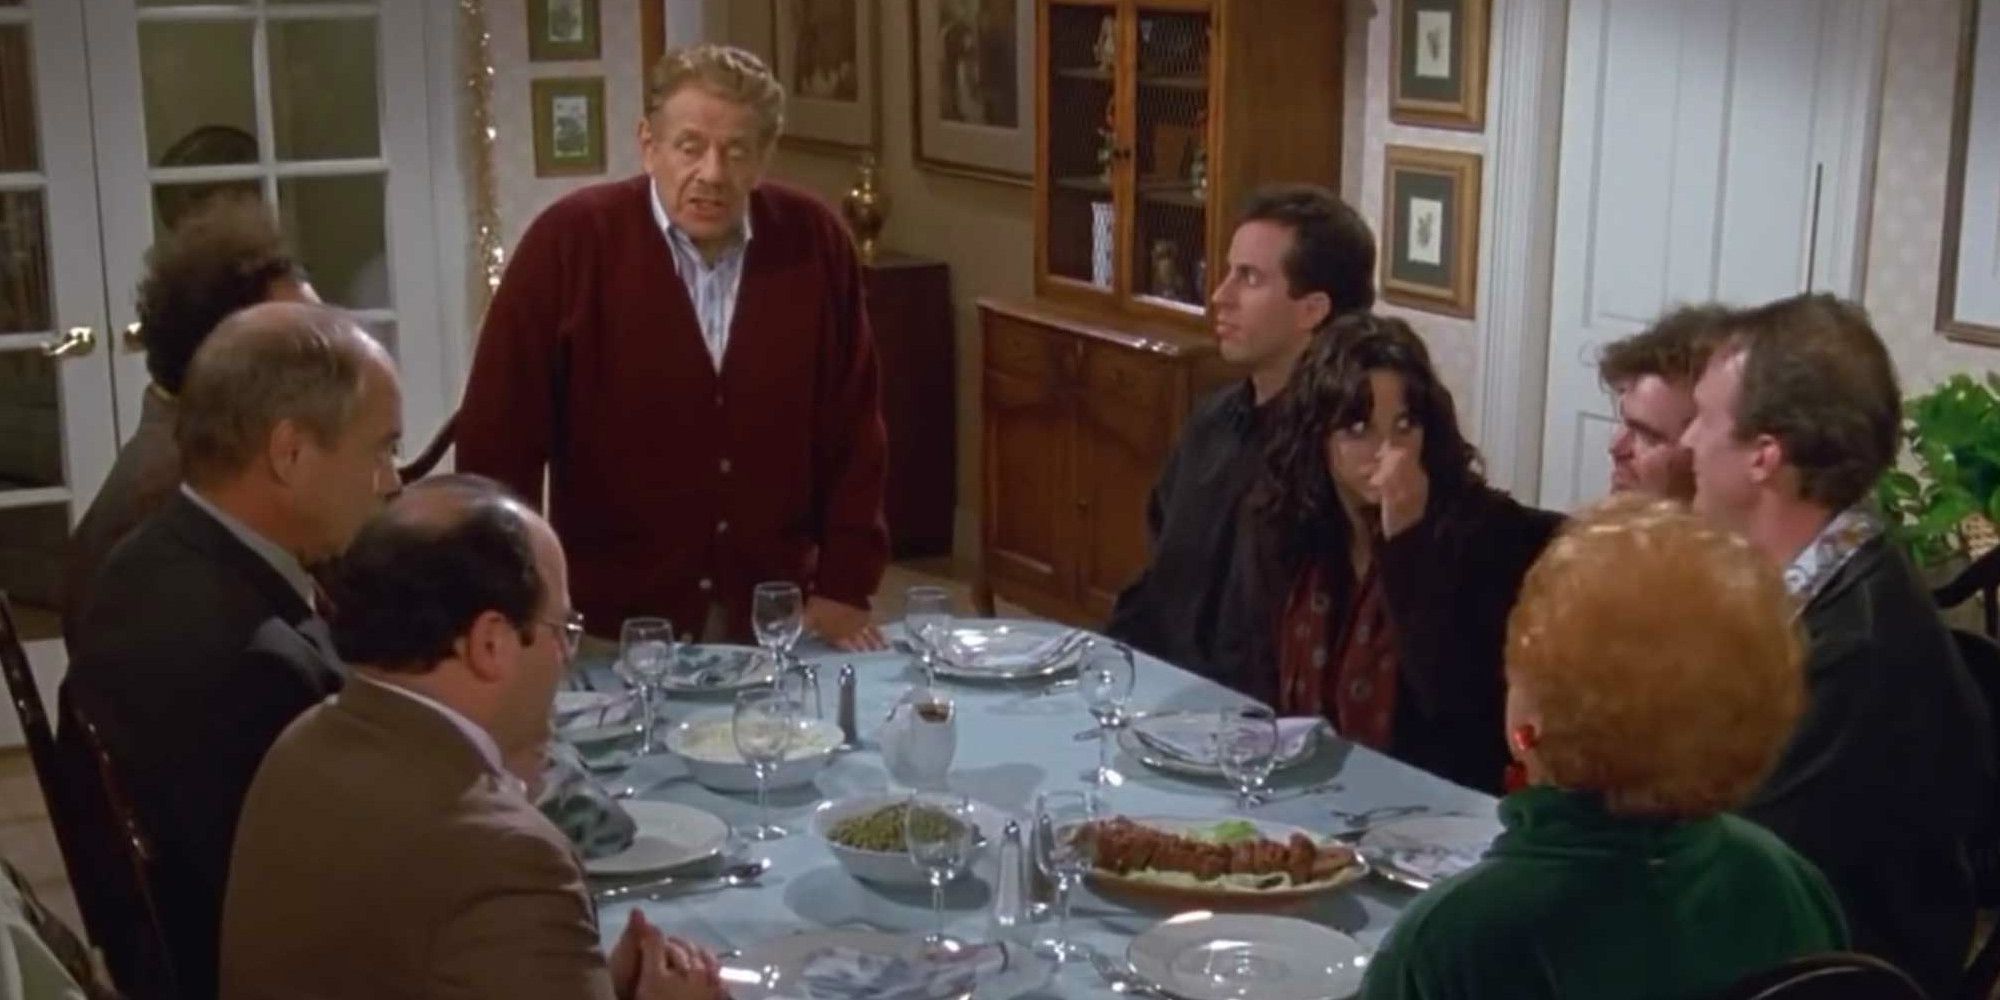 The characters having the Festivus meal in Seinfeld